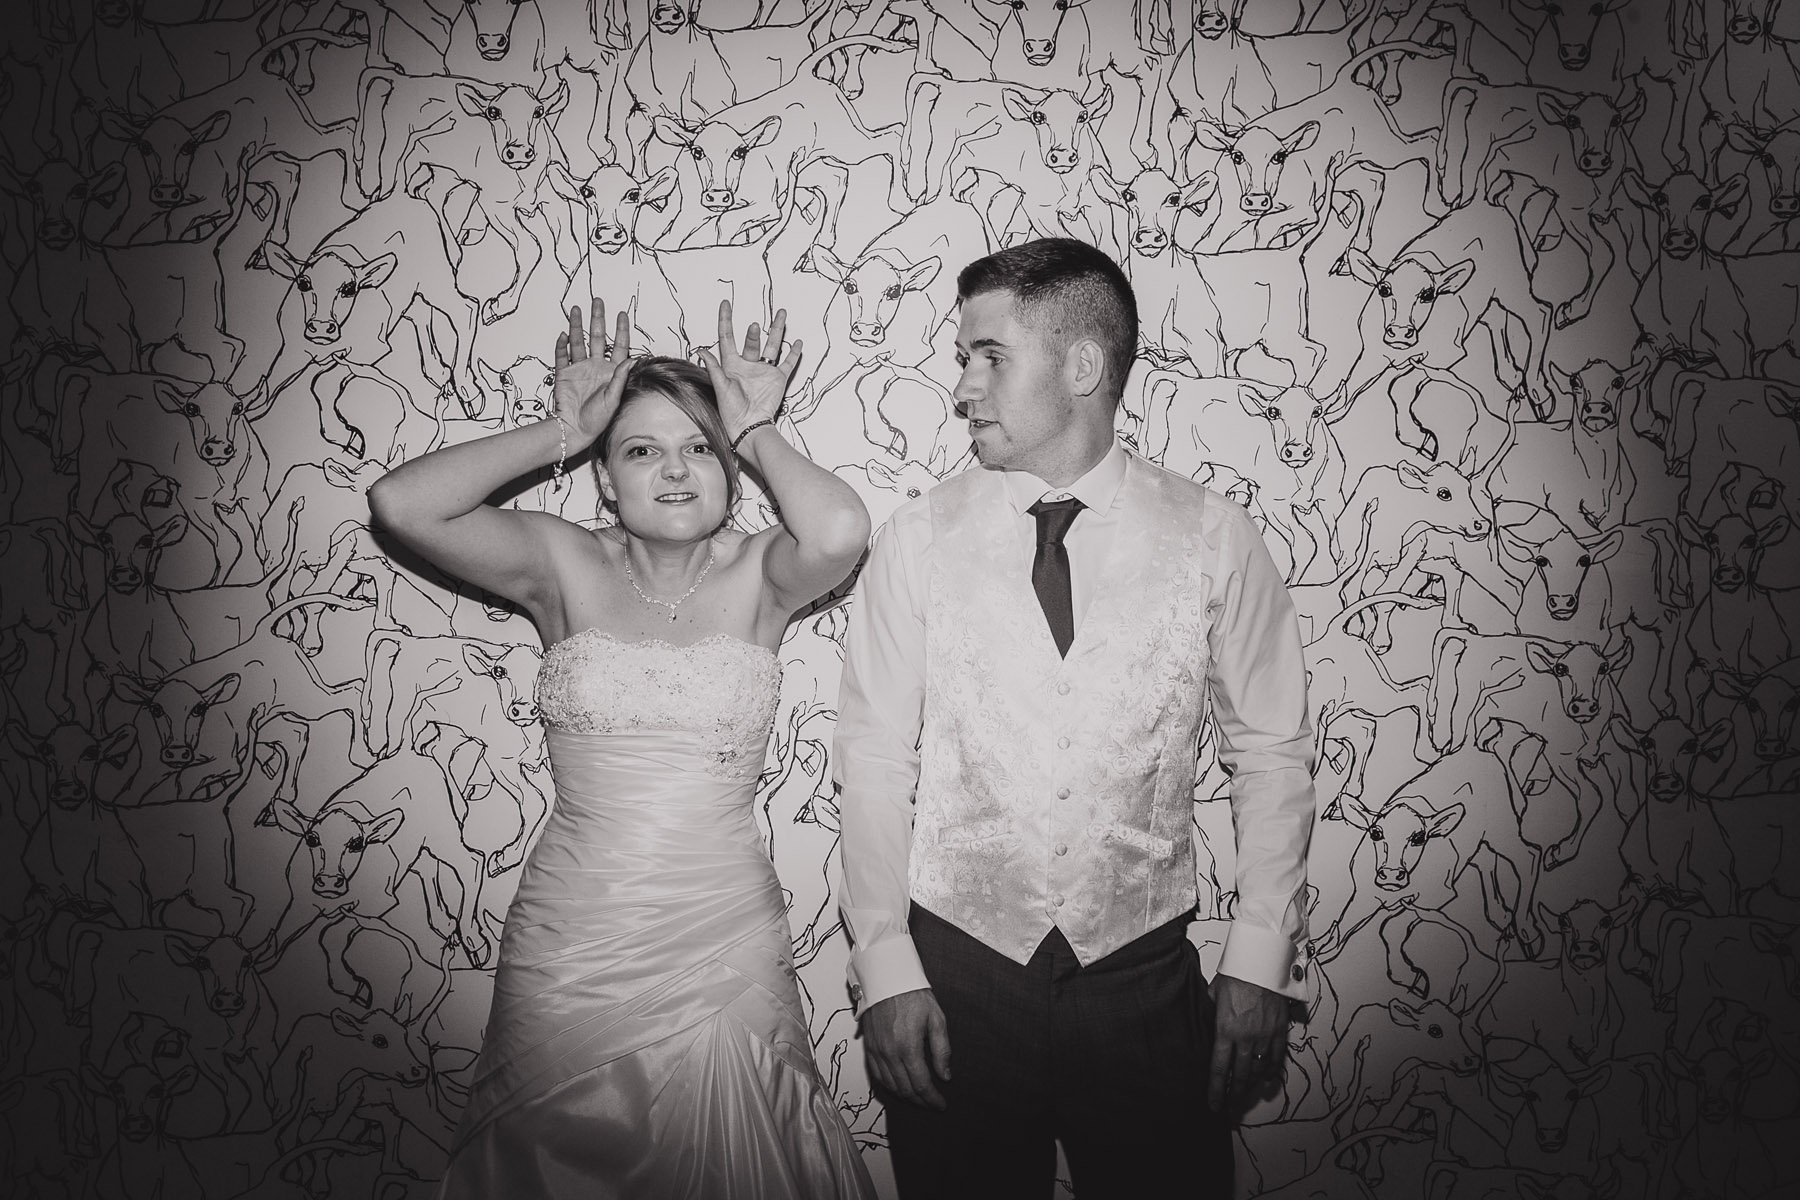 Max and Louise's awesome wedding at Southend Barns near Chichester